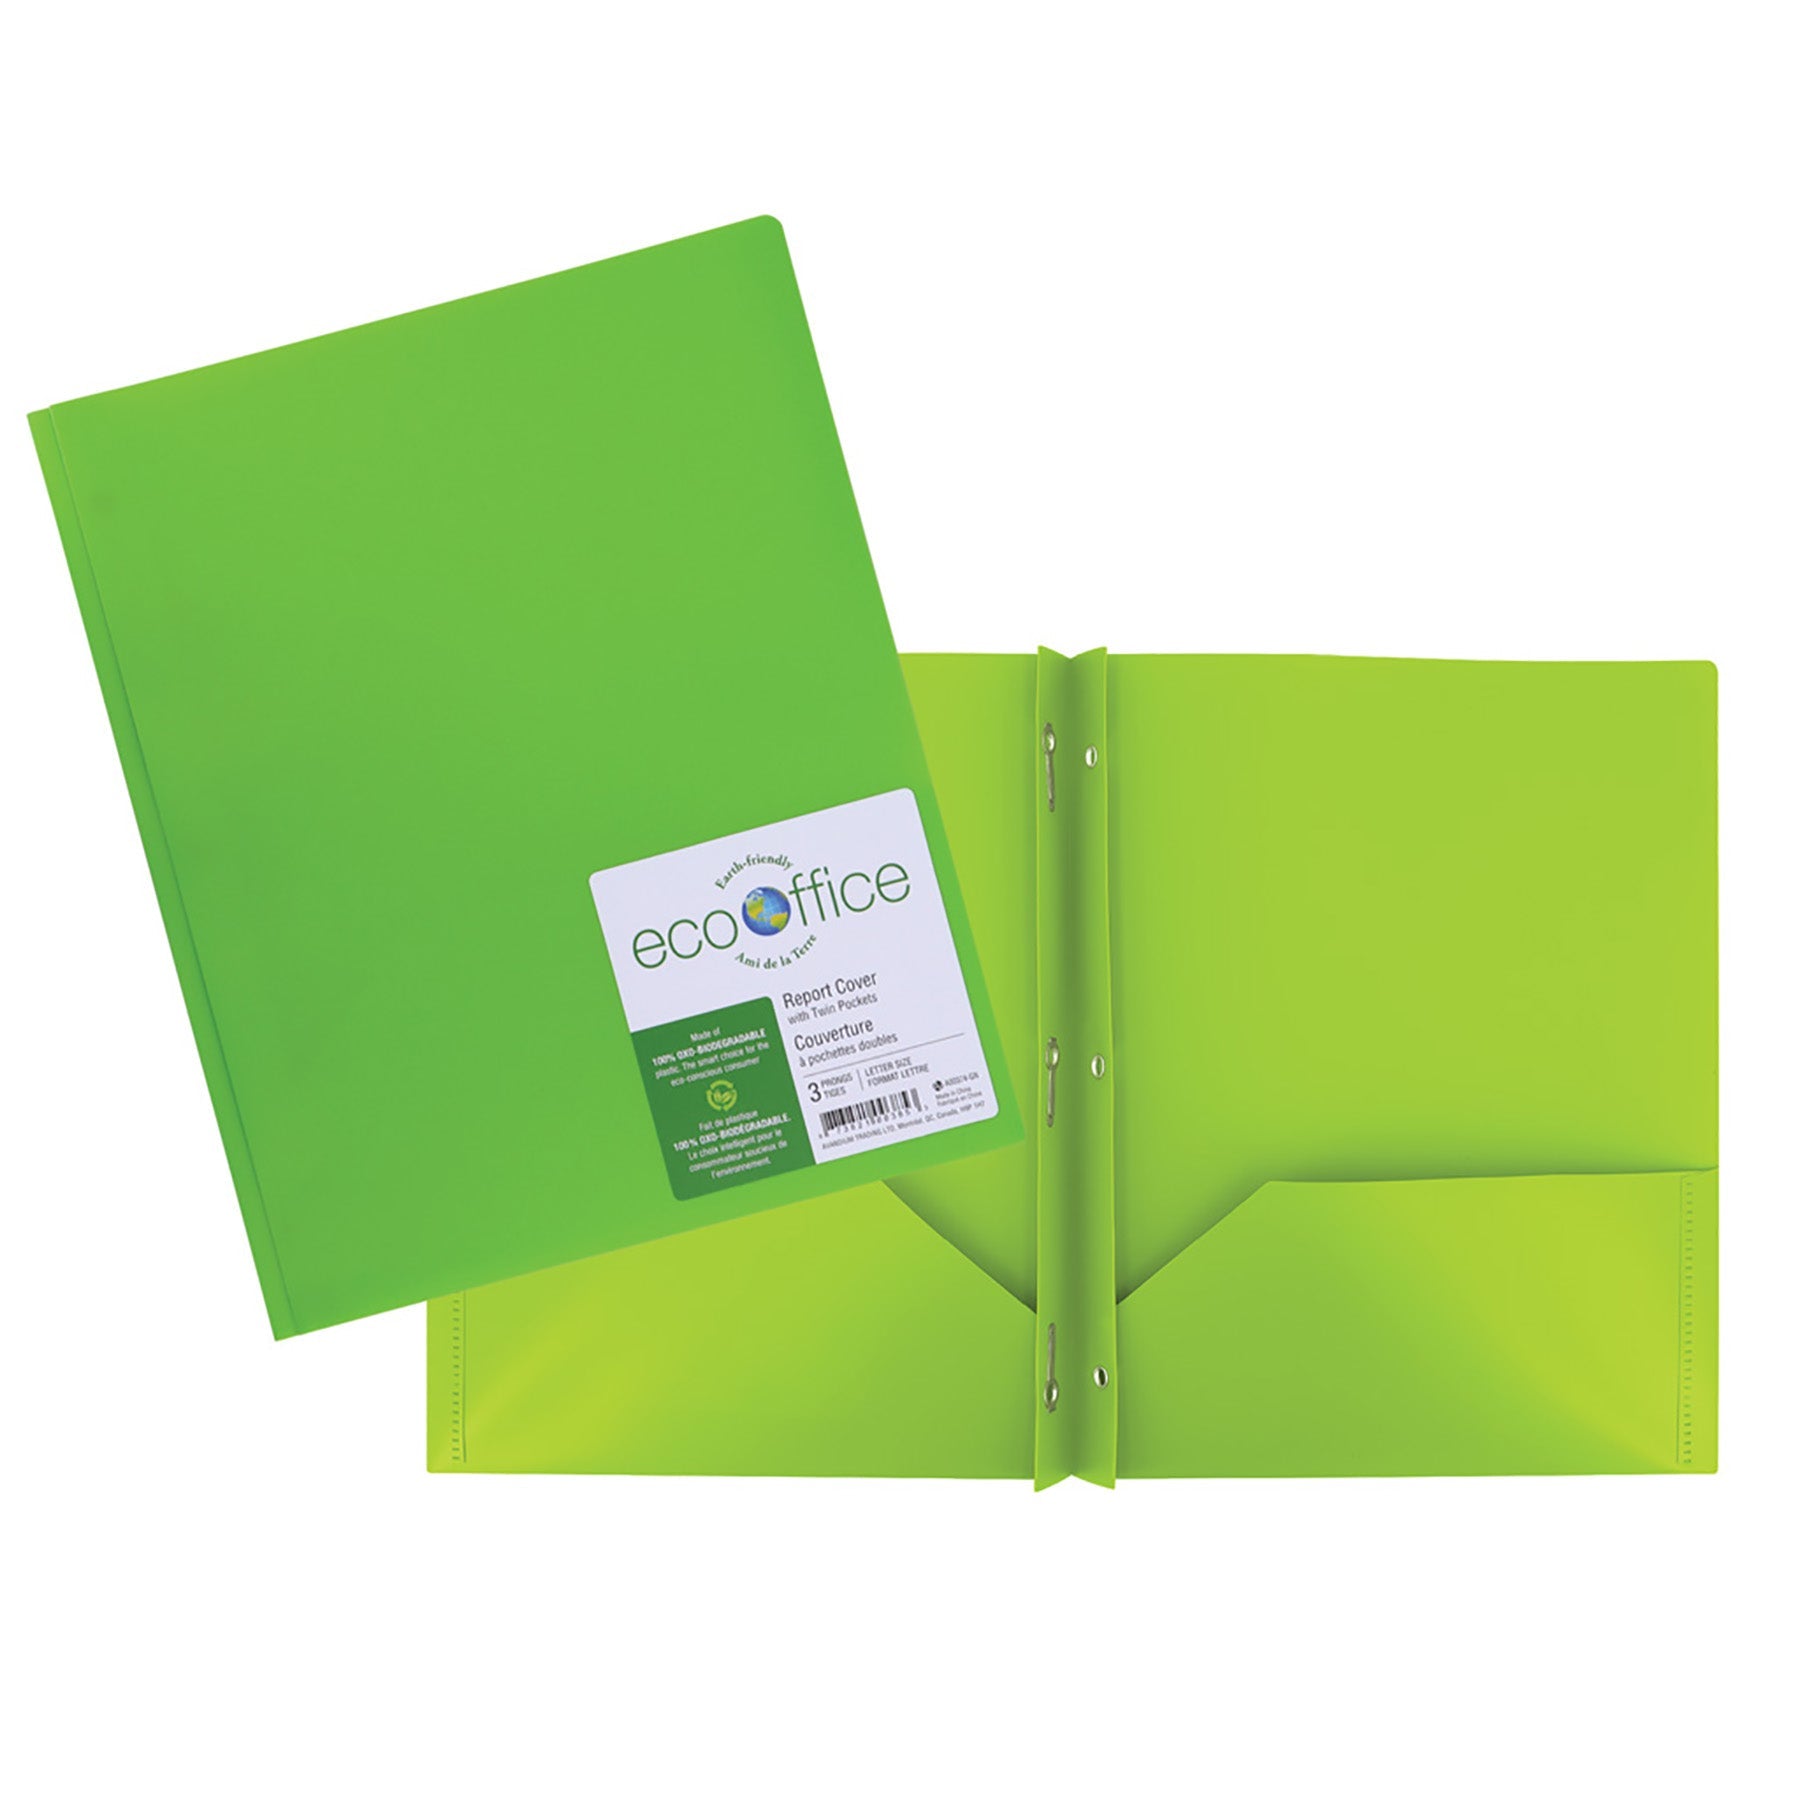 EcoOffice 3-Prong Report Cover 2 Pockets Green Plastic 11.25x9.25in